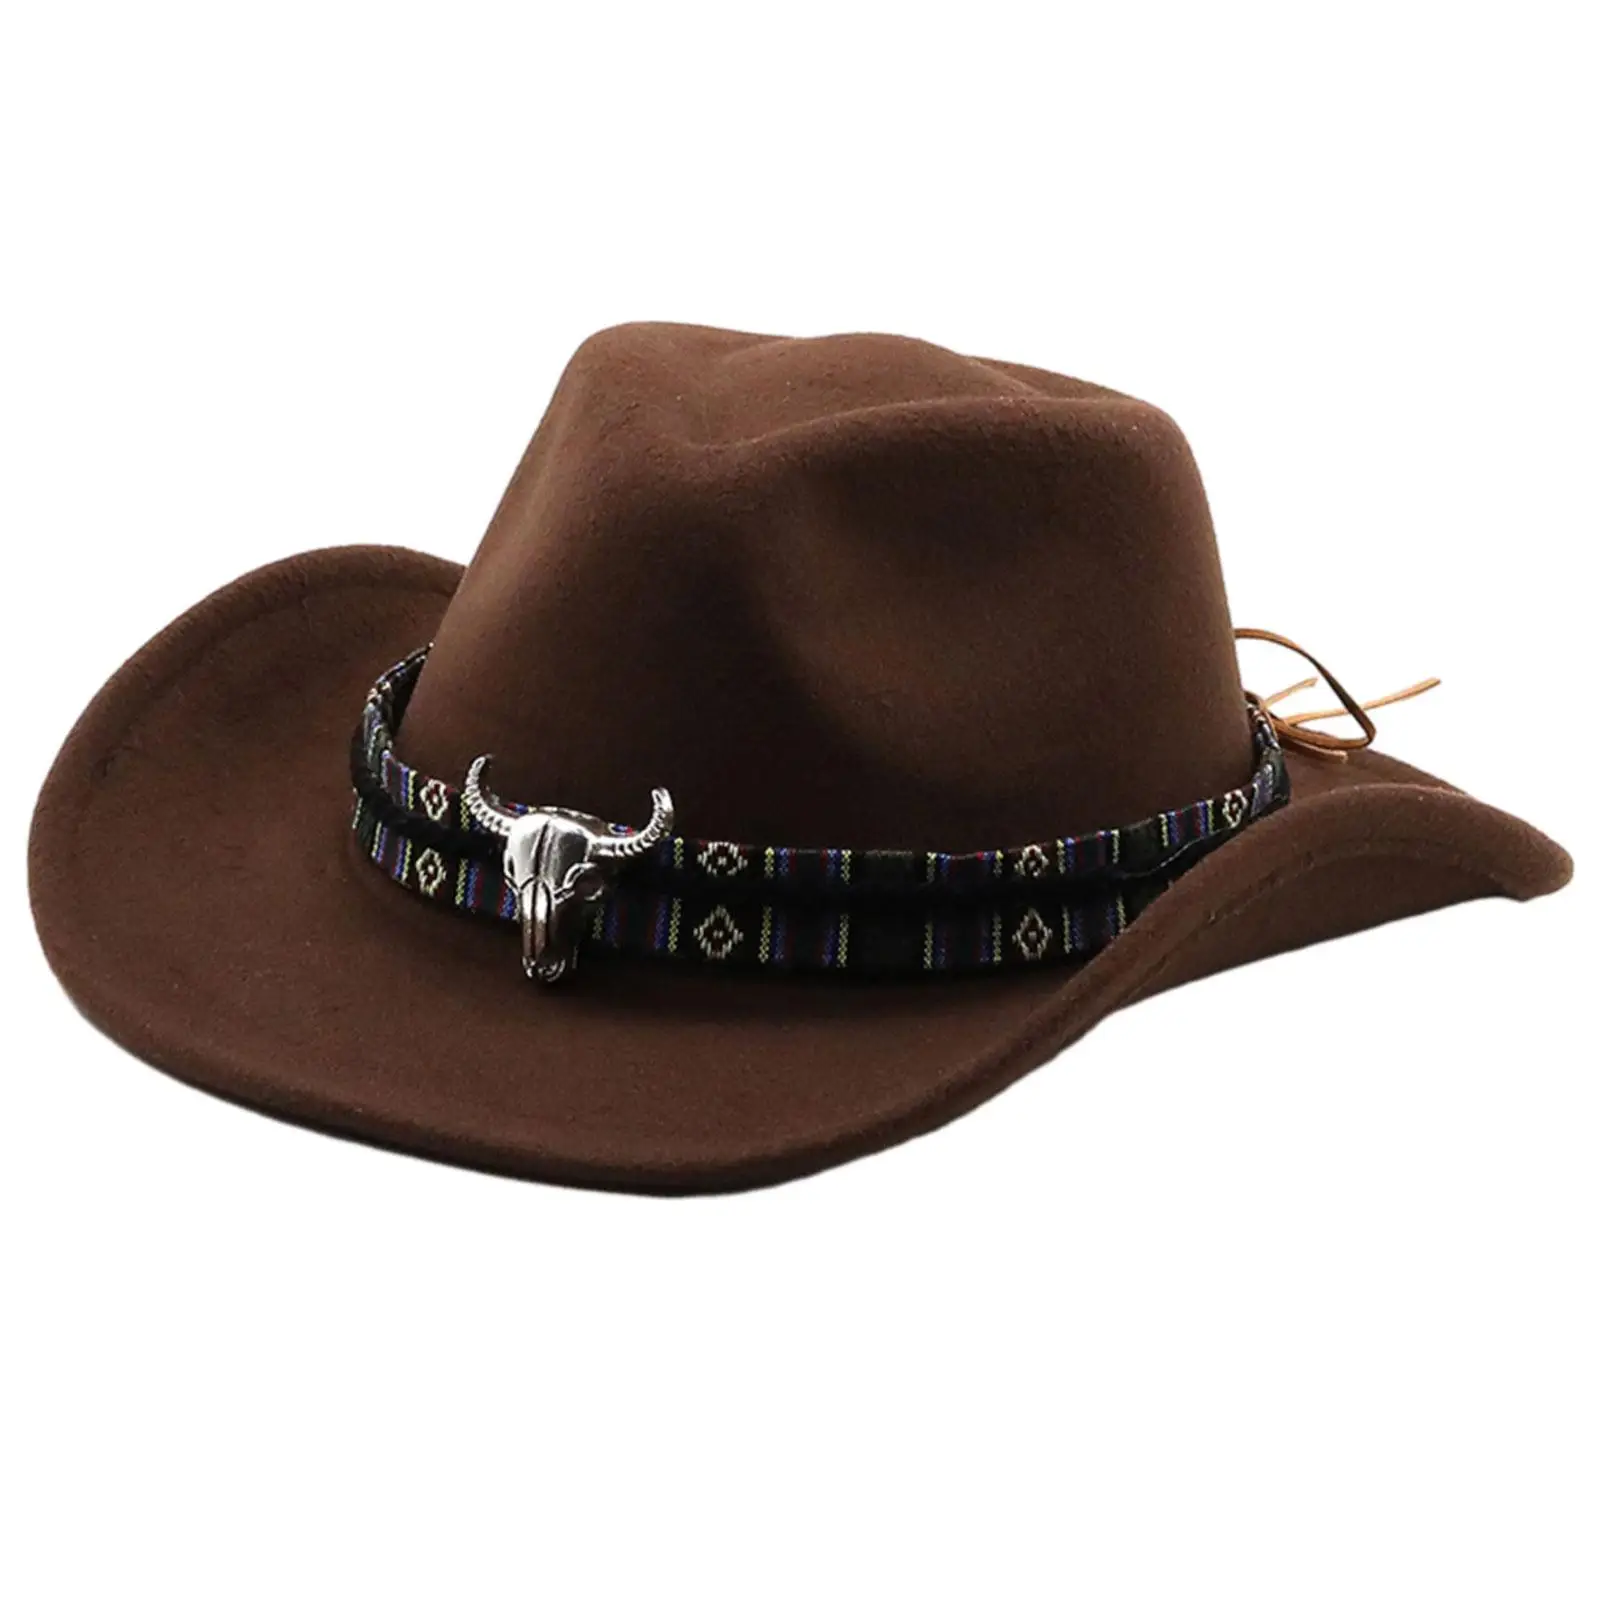 Cowboy Hat Women Warm Summer Outdoor Sunshade Hat for Travel Hiking Camping